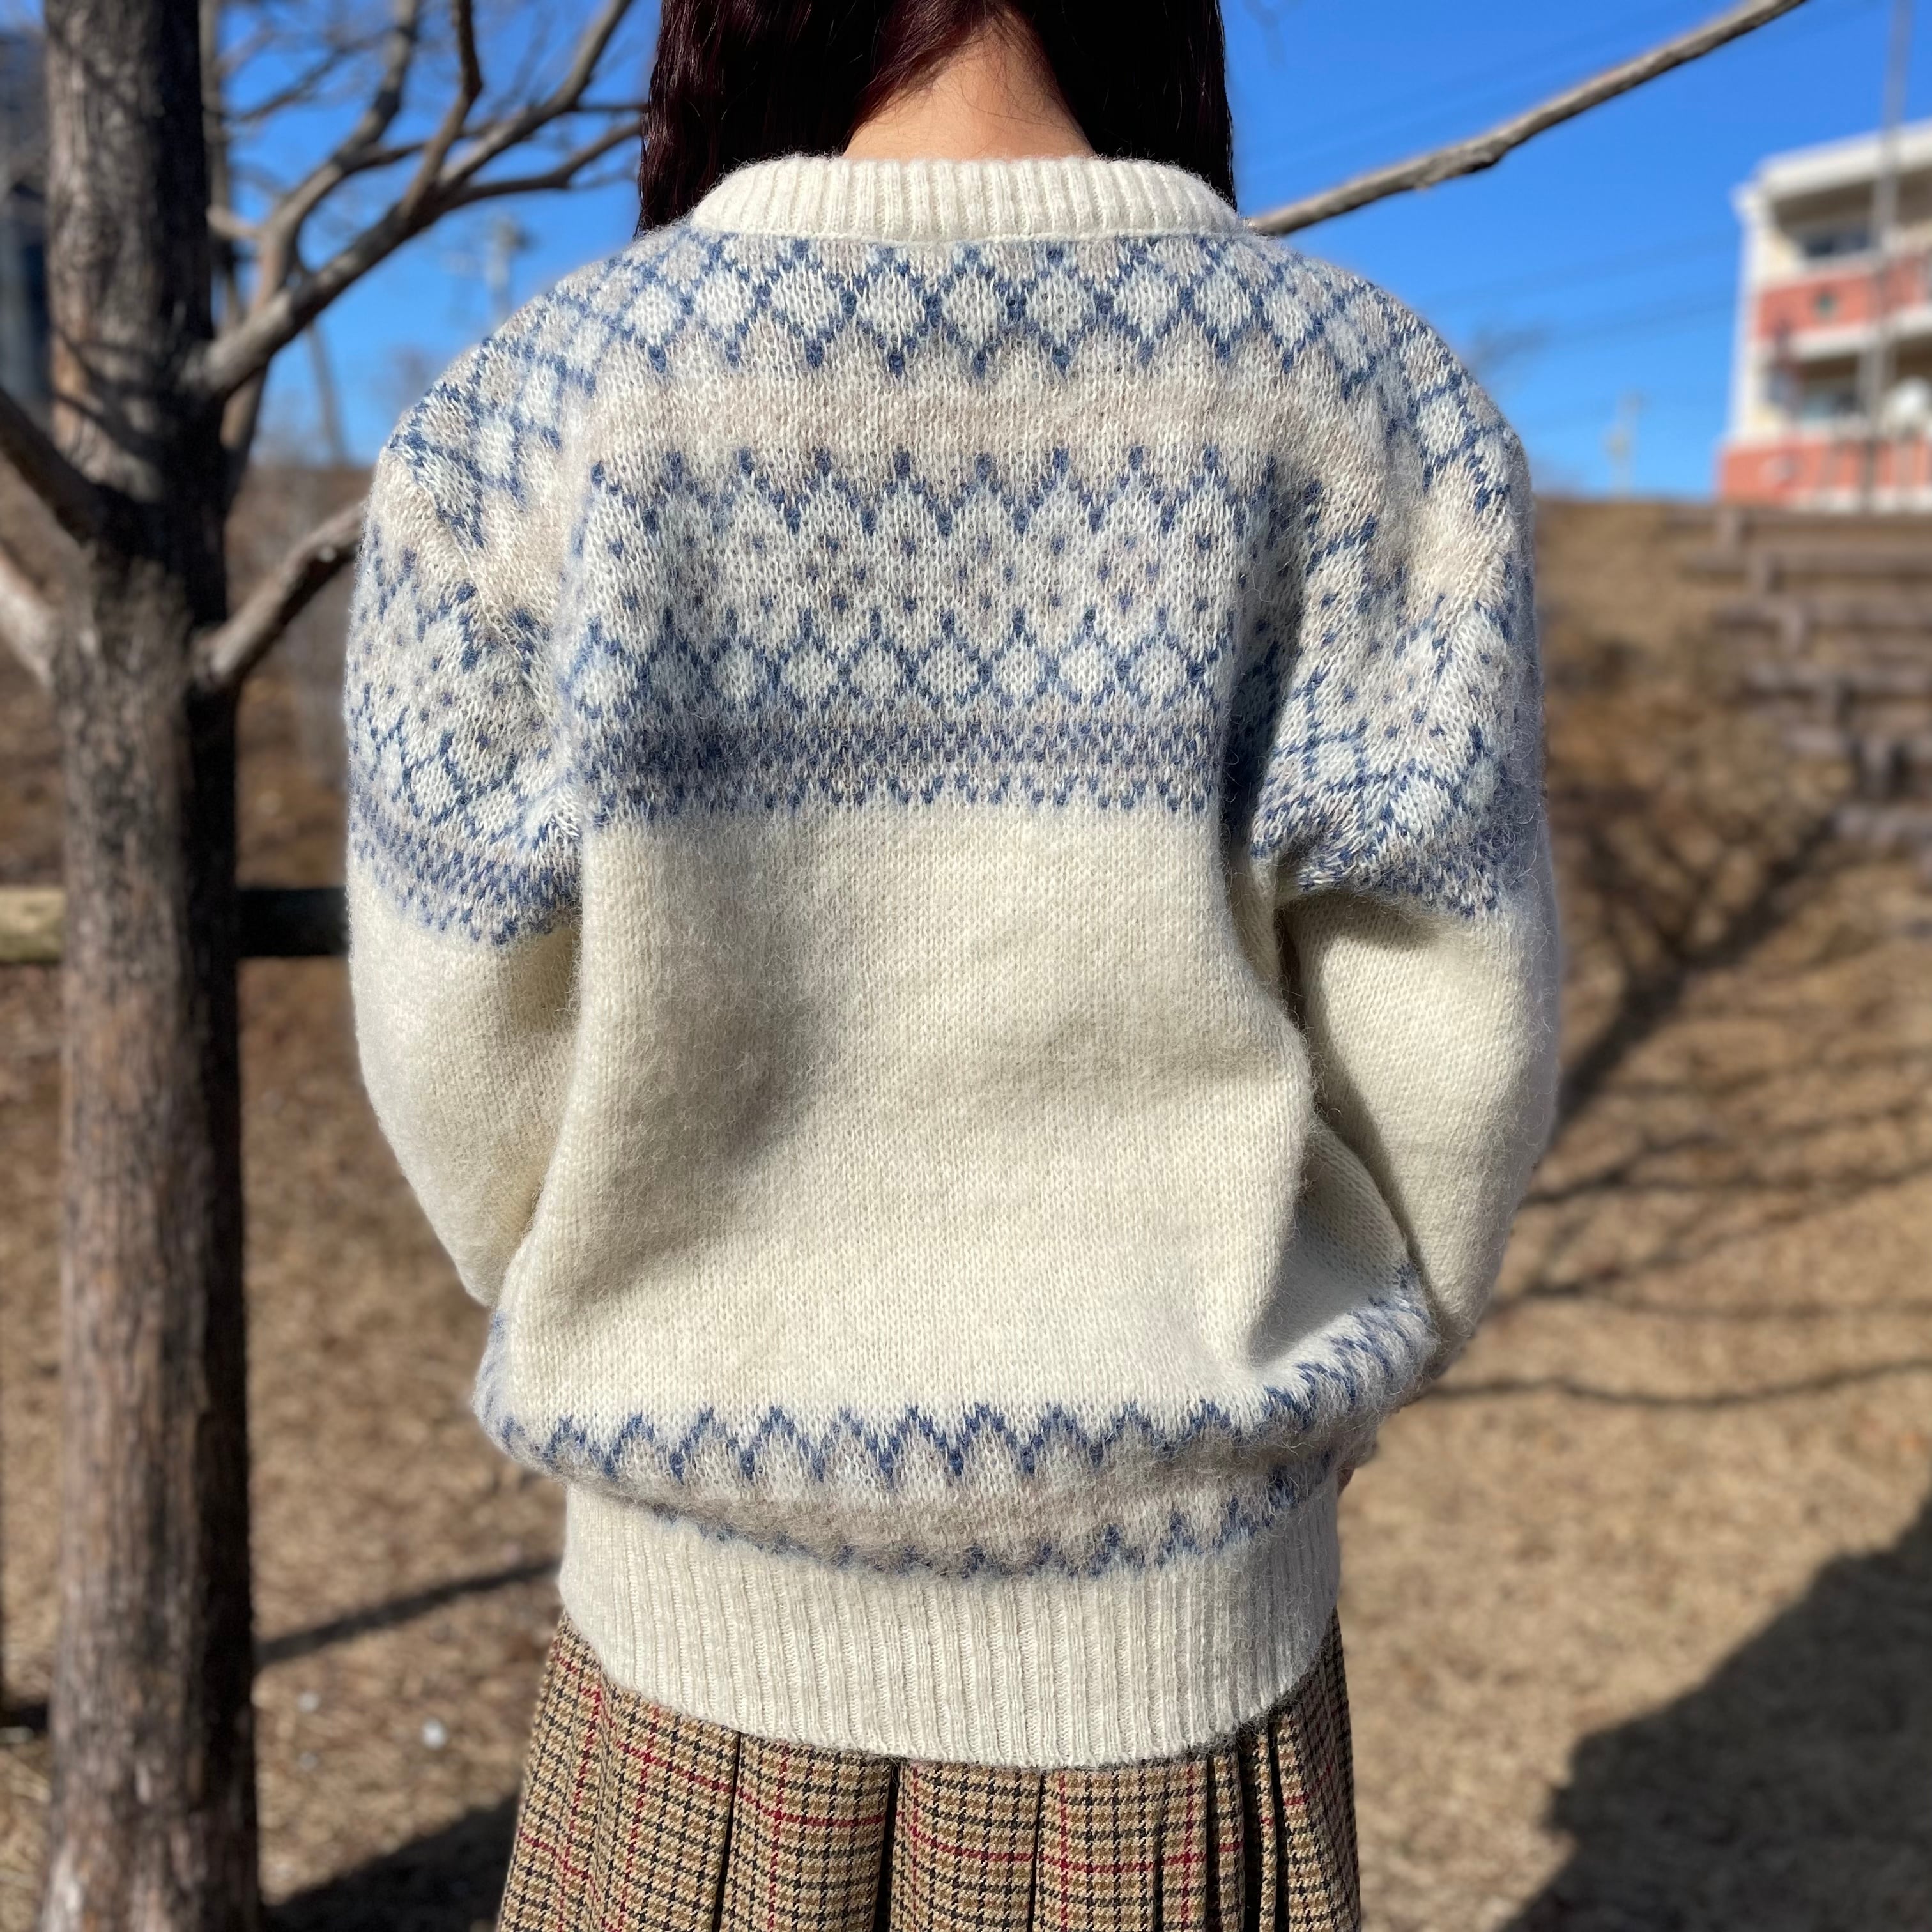 Nordic patterned knit sweater ニットセーター 古着 ノルディック柄 238